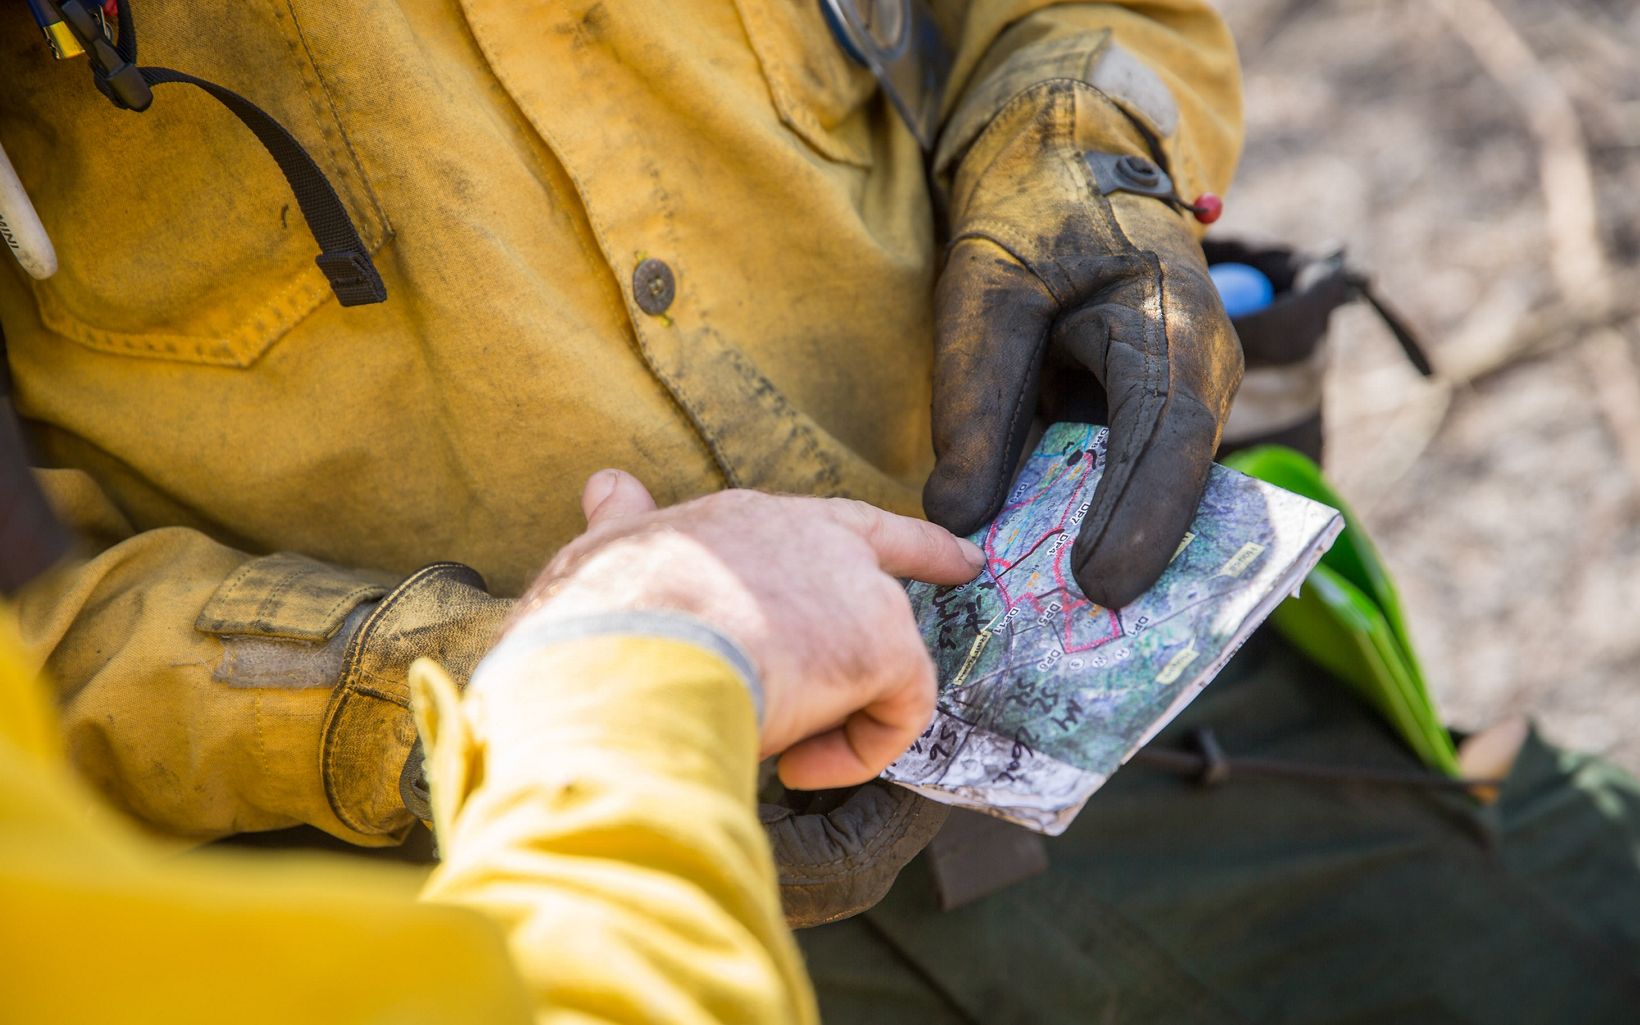 The hands of fire crew members hold a map.